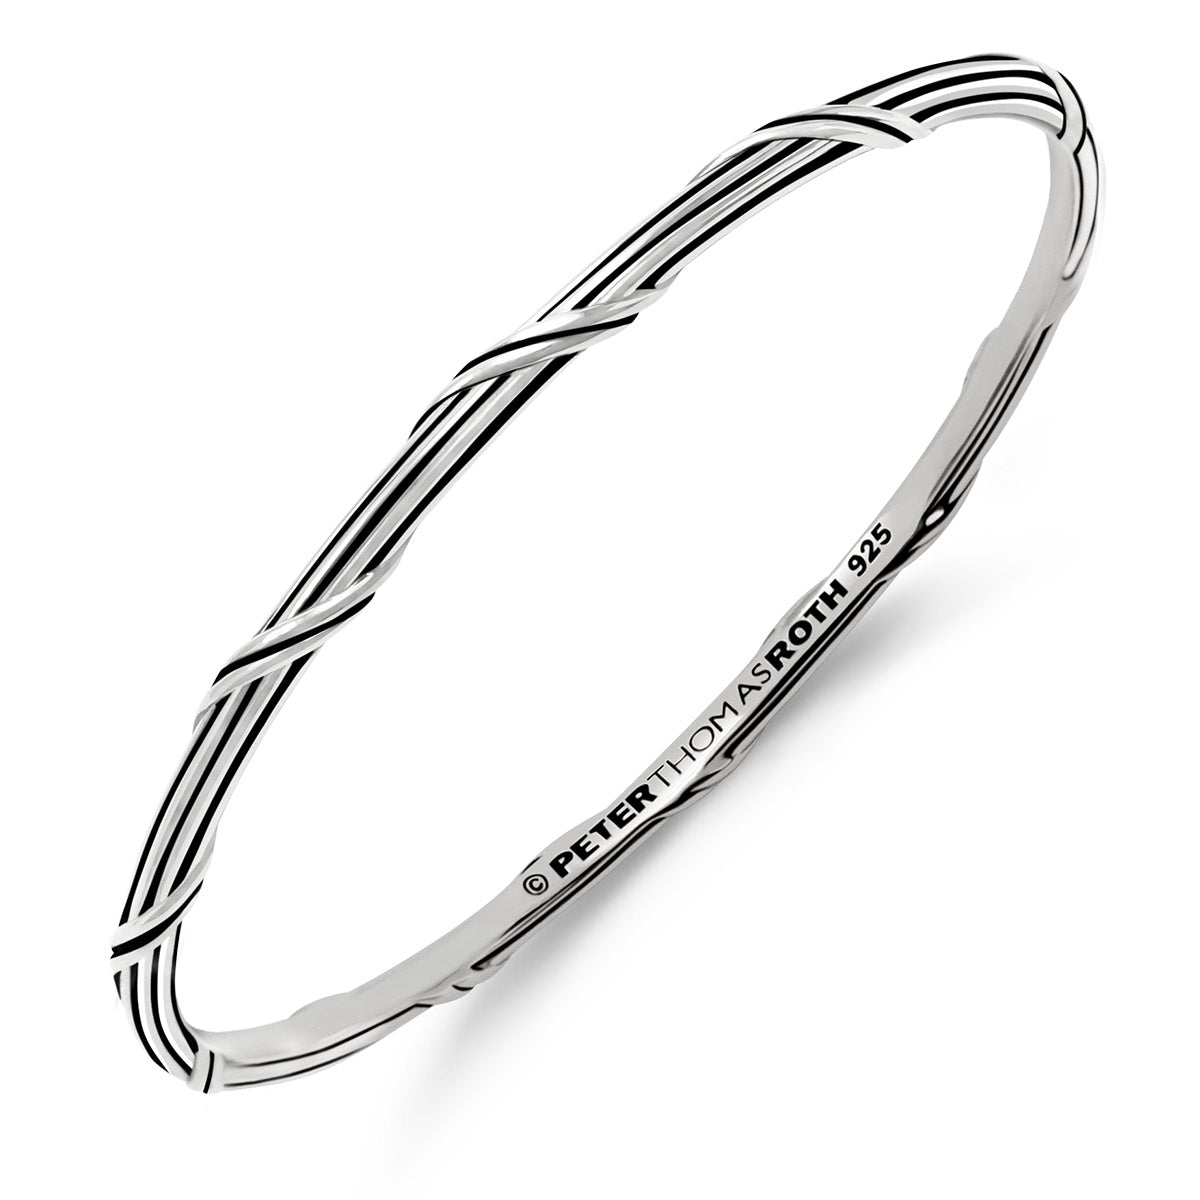 Signature Classic Stack Oval Bangle Set with white topaz in sterling silver